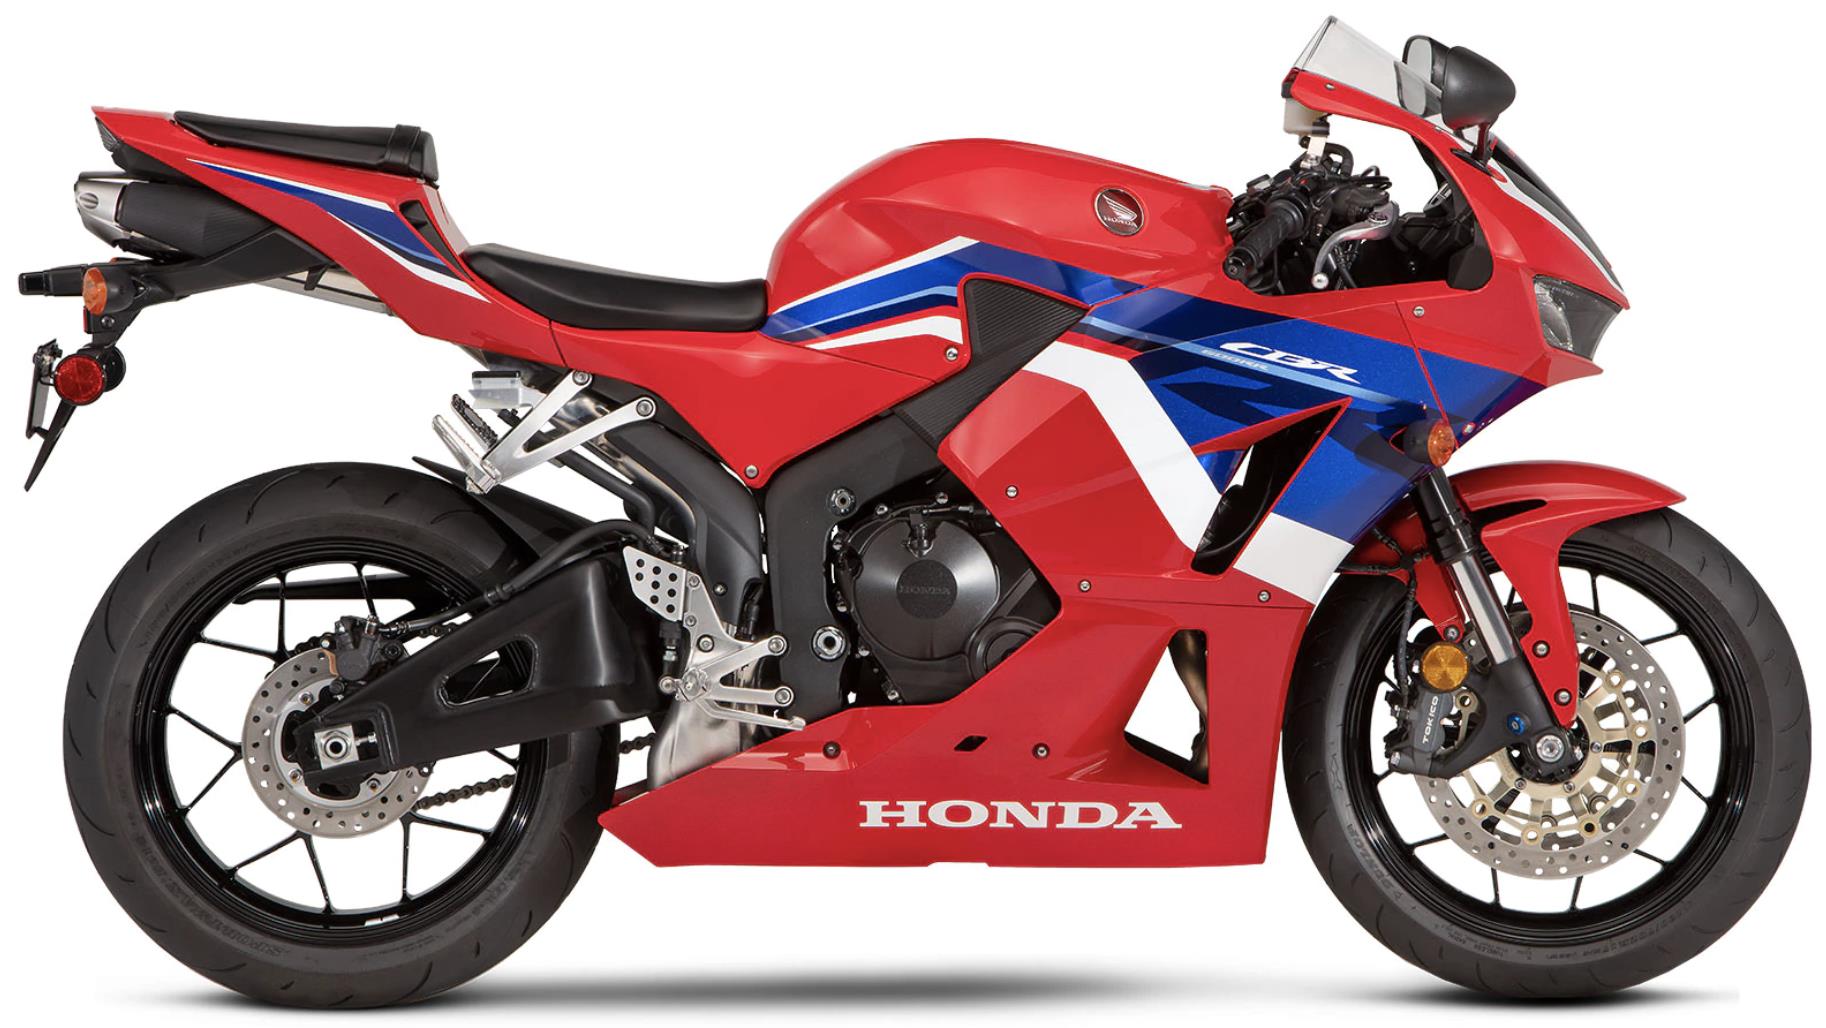 2024 Honda CBR600RR Specifications and Expected Price in India